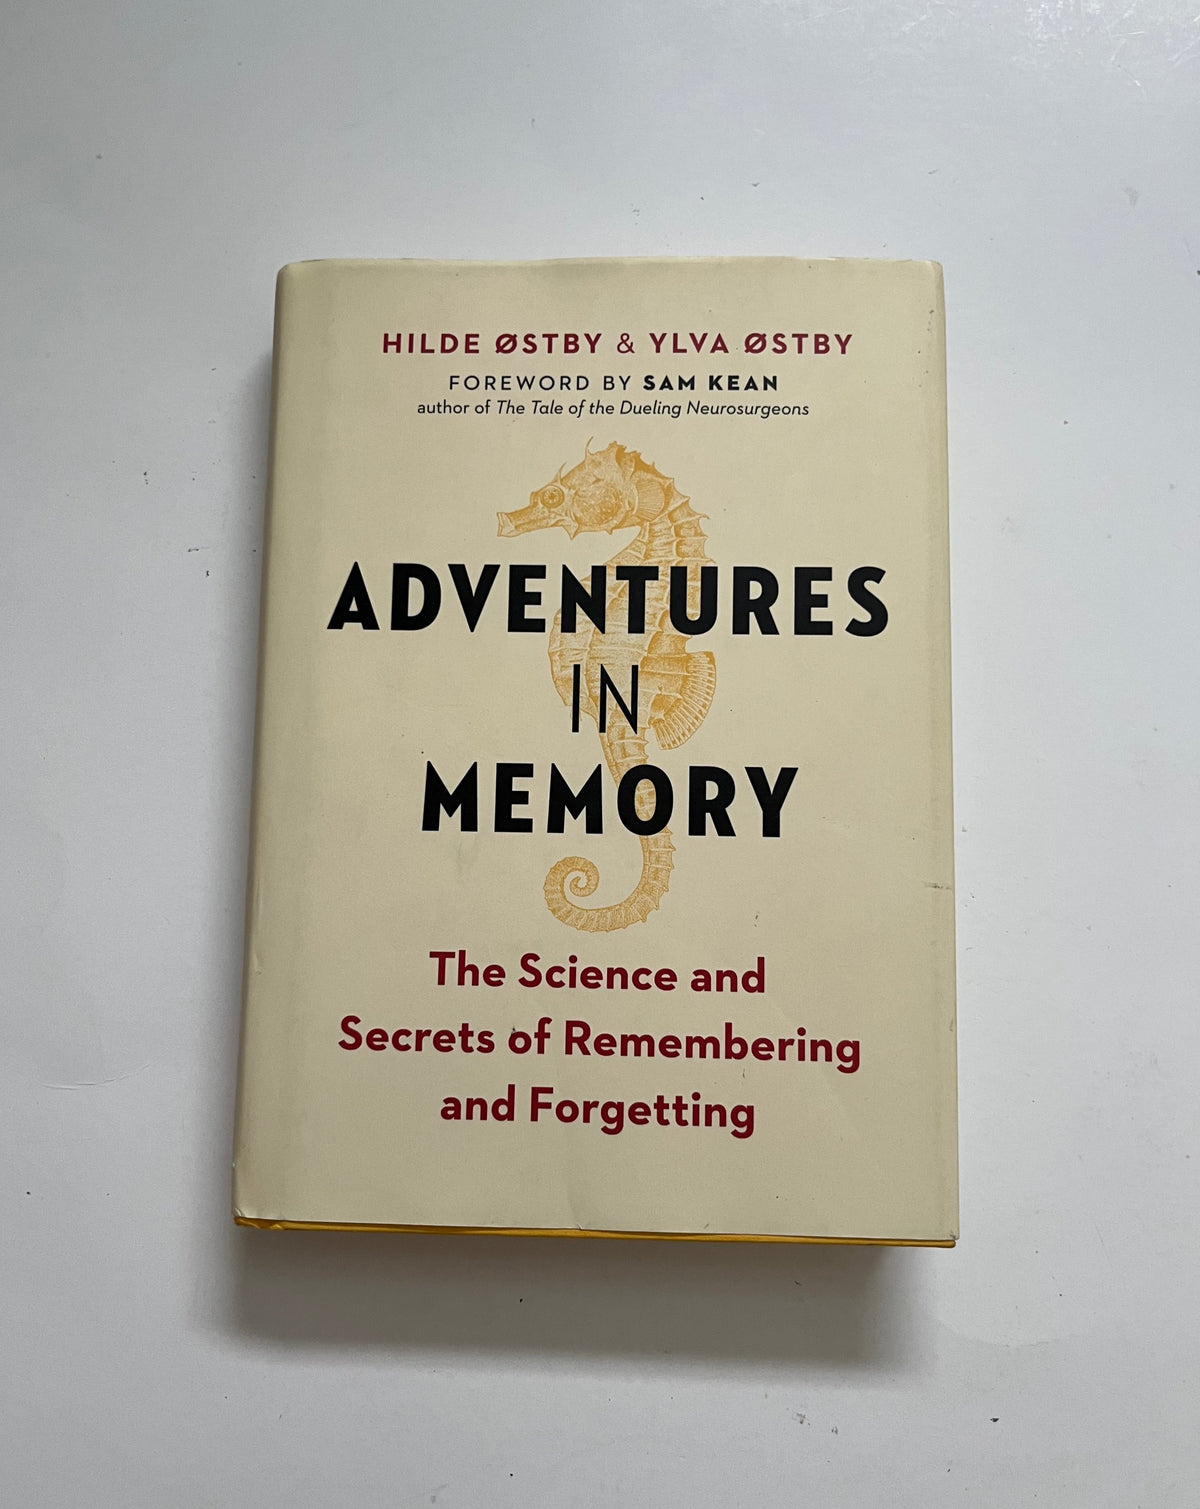 Adventures in Memory by Hilde Ostby &amp; Yluva Ostby